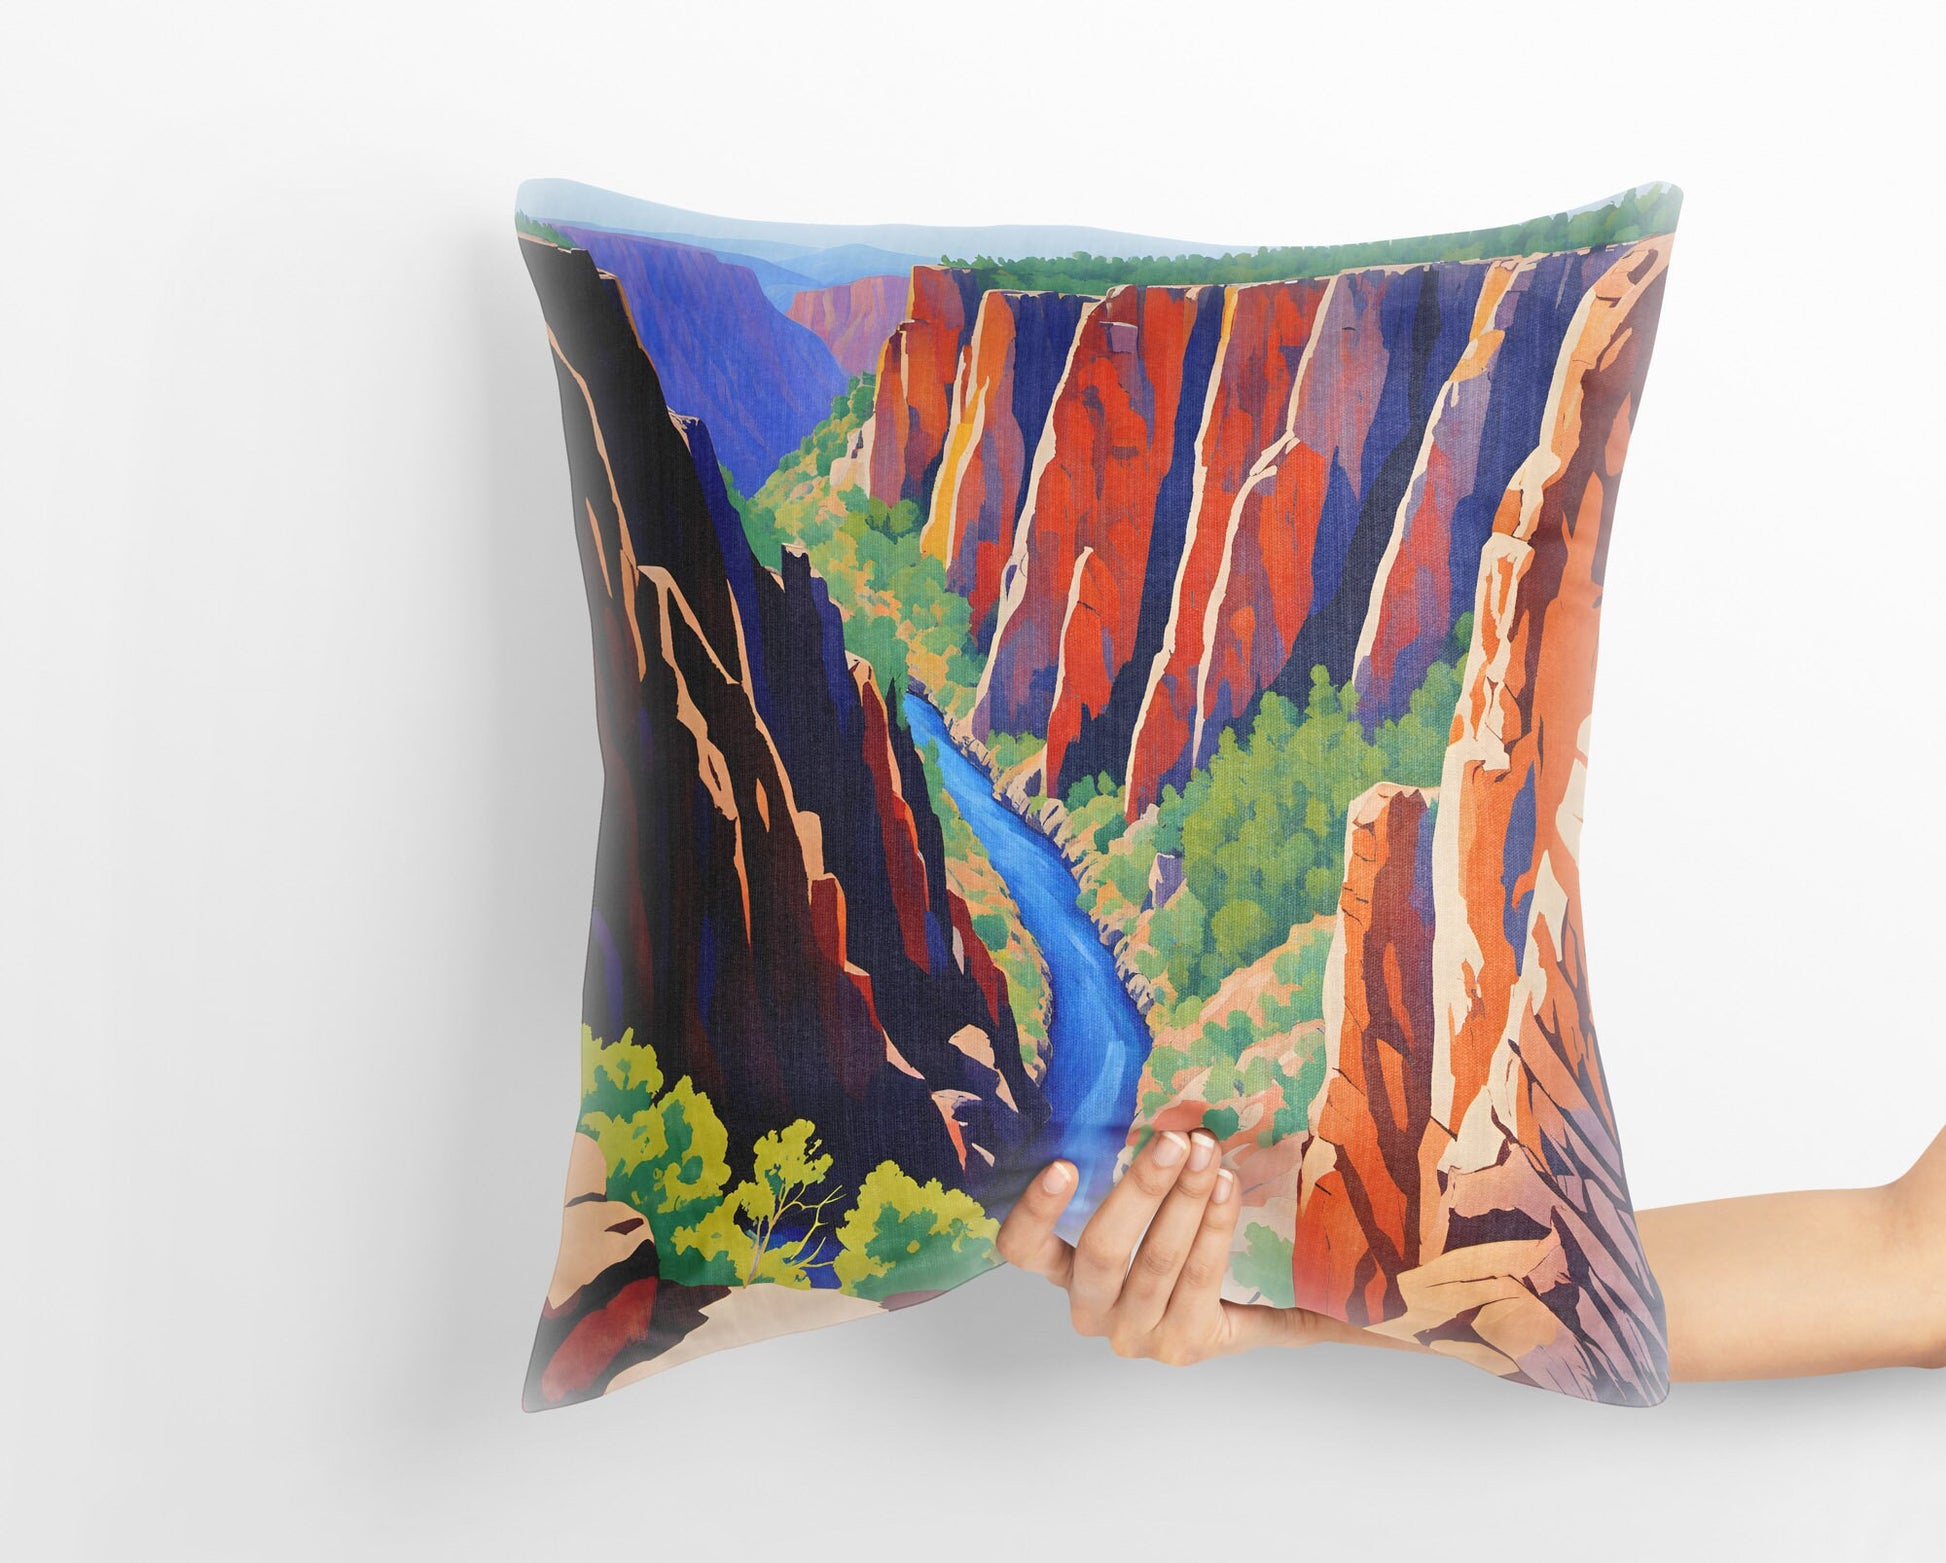 North Rim Chasm View In Black Canyon Of The Gunnison National Park, Colorado Throw Pillow Cover, Usa Travel Pillow, Large Pillow Cases